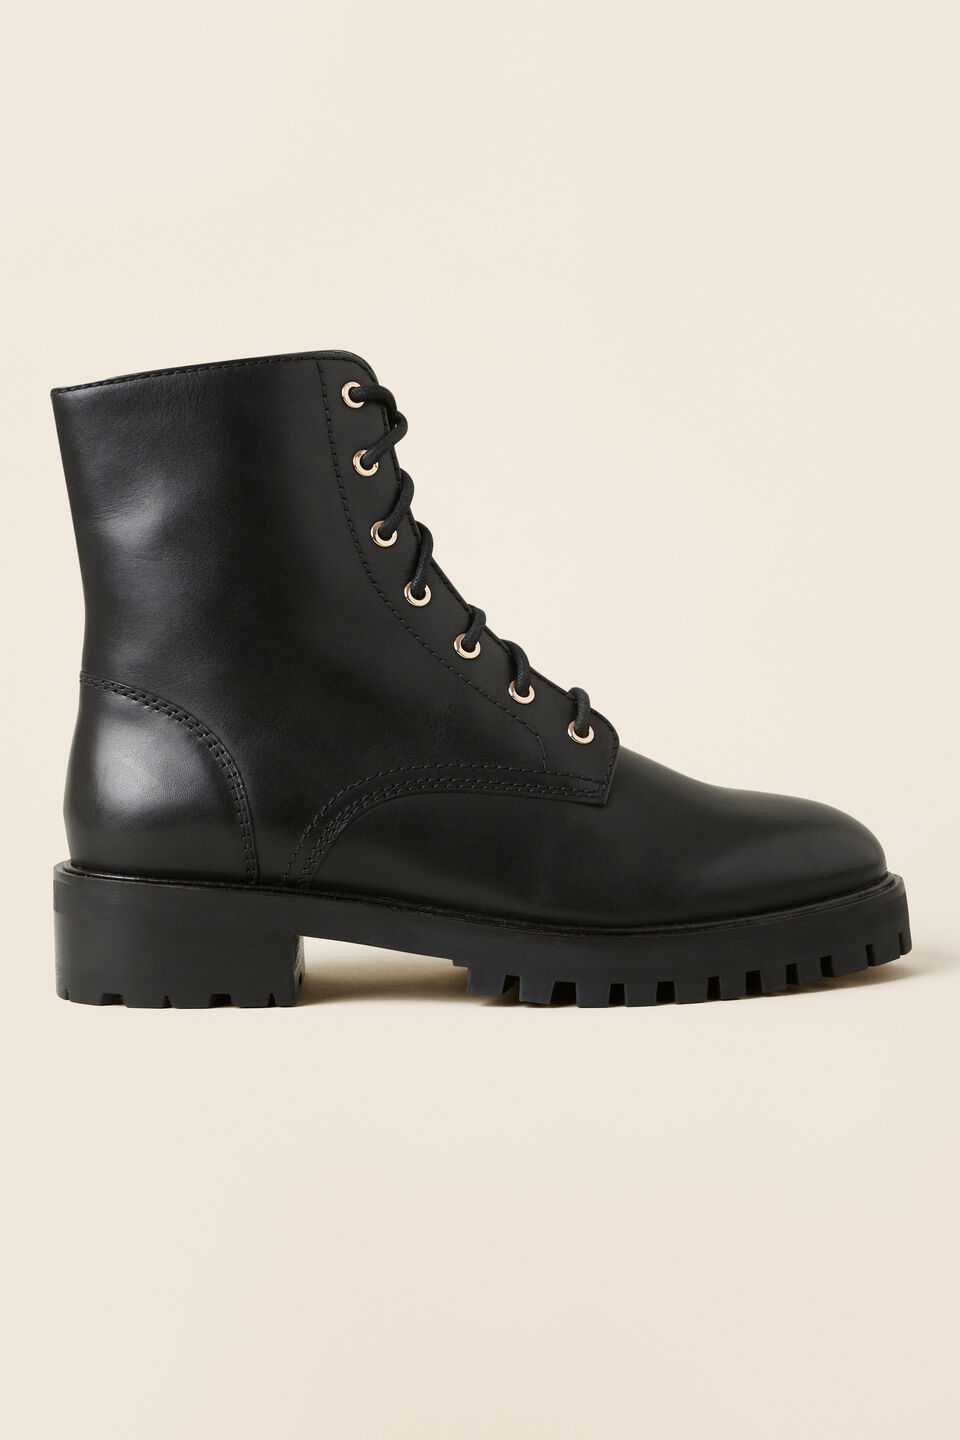 Tammy Lace Up Ankle Boot  Black  hi-res